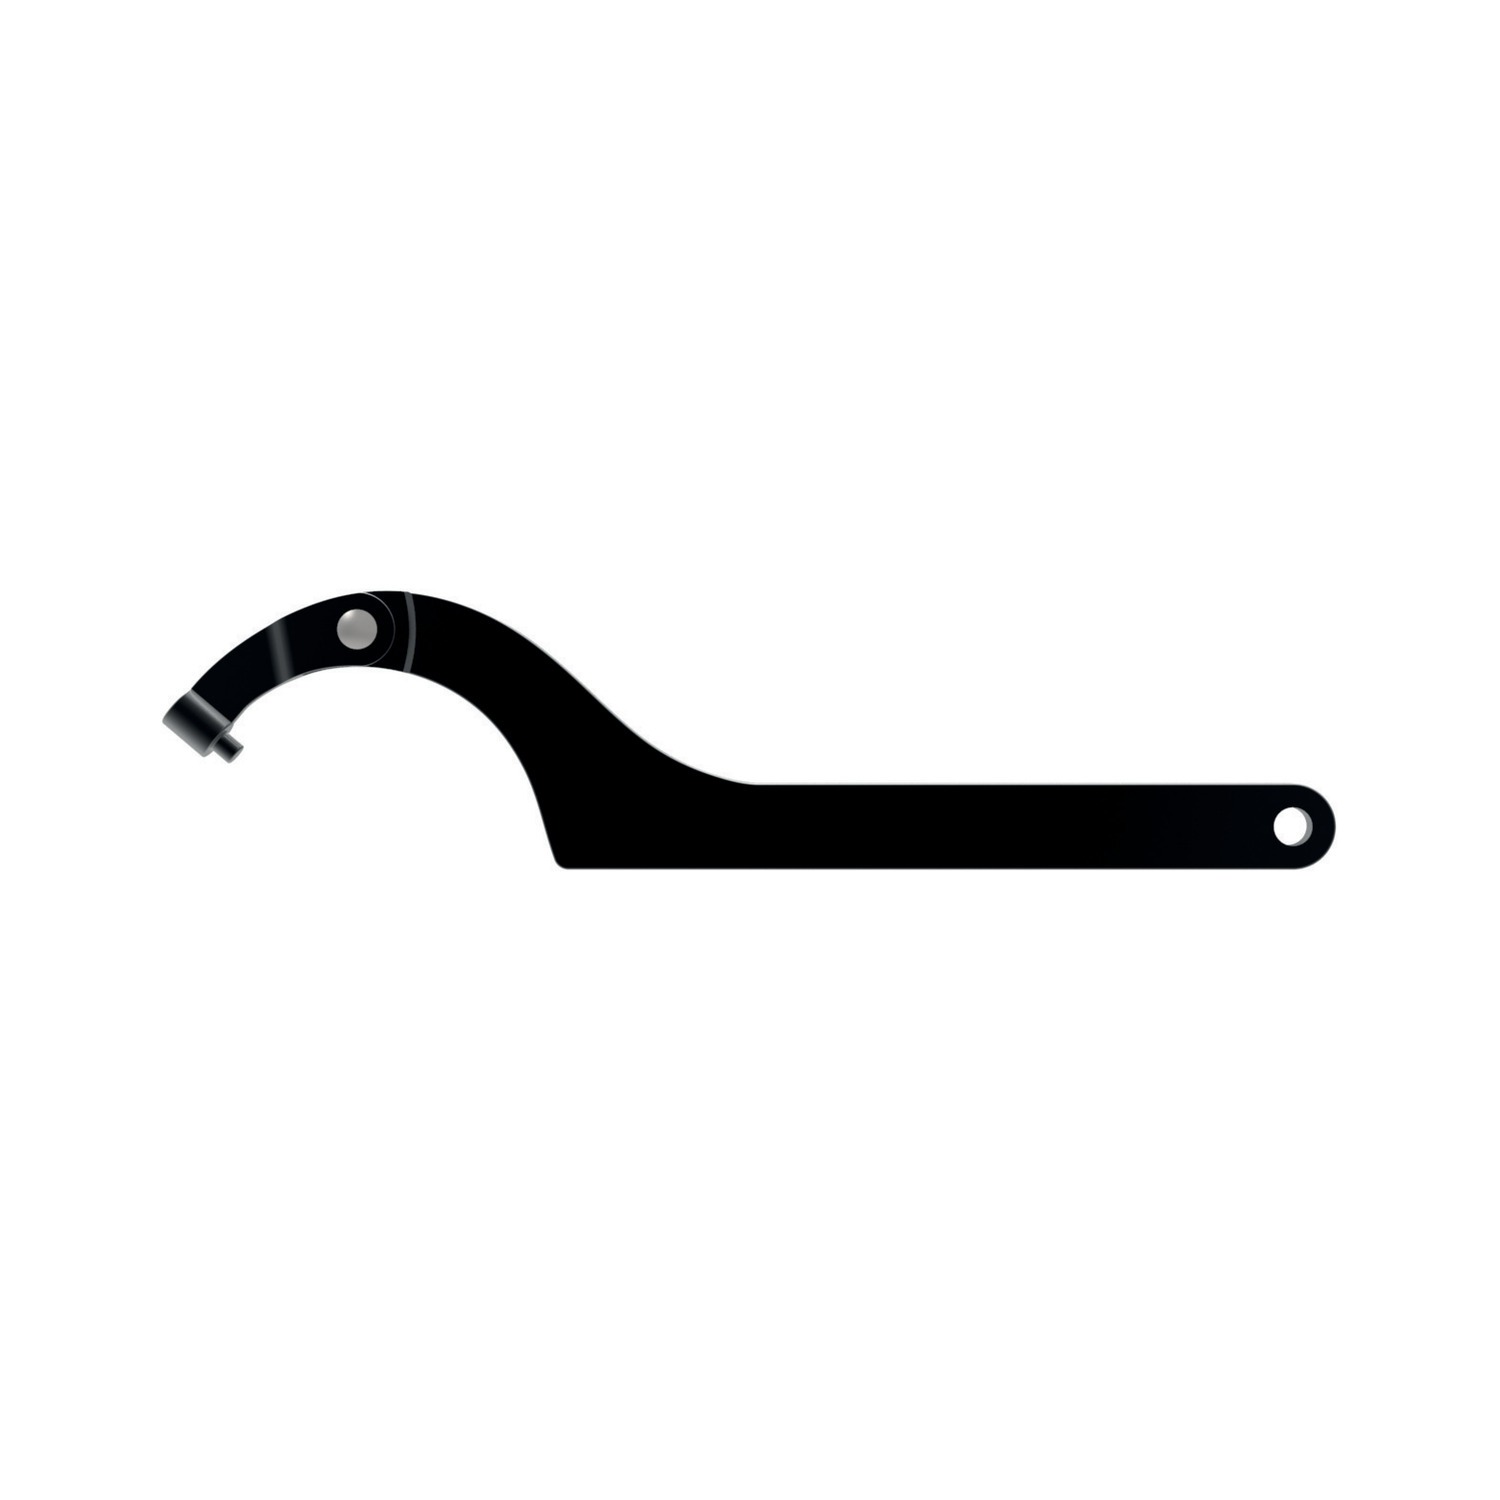 95152 - Hook Spanners - with Pin Nose